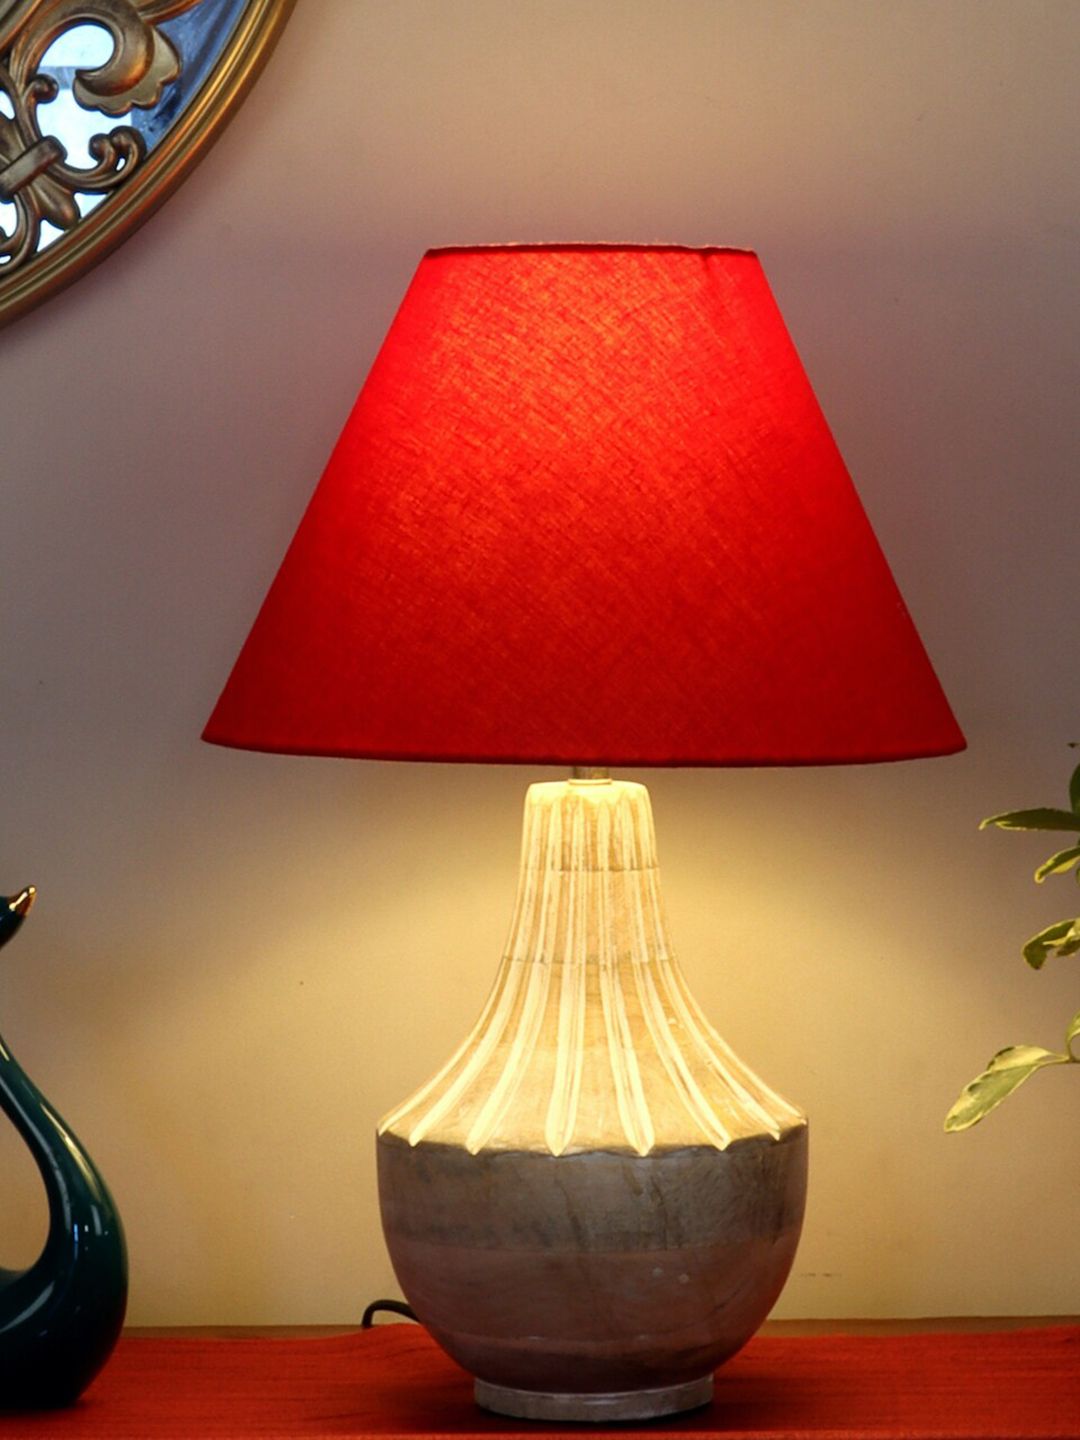 nakshikathaa White Table Lamp with Red Shade Price in India